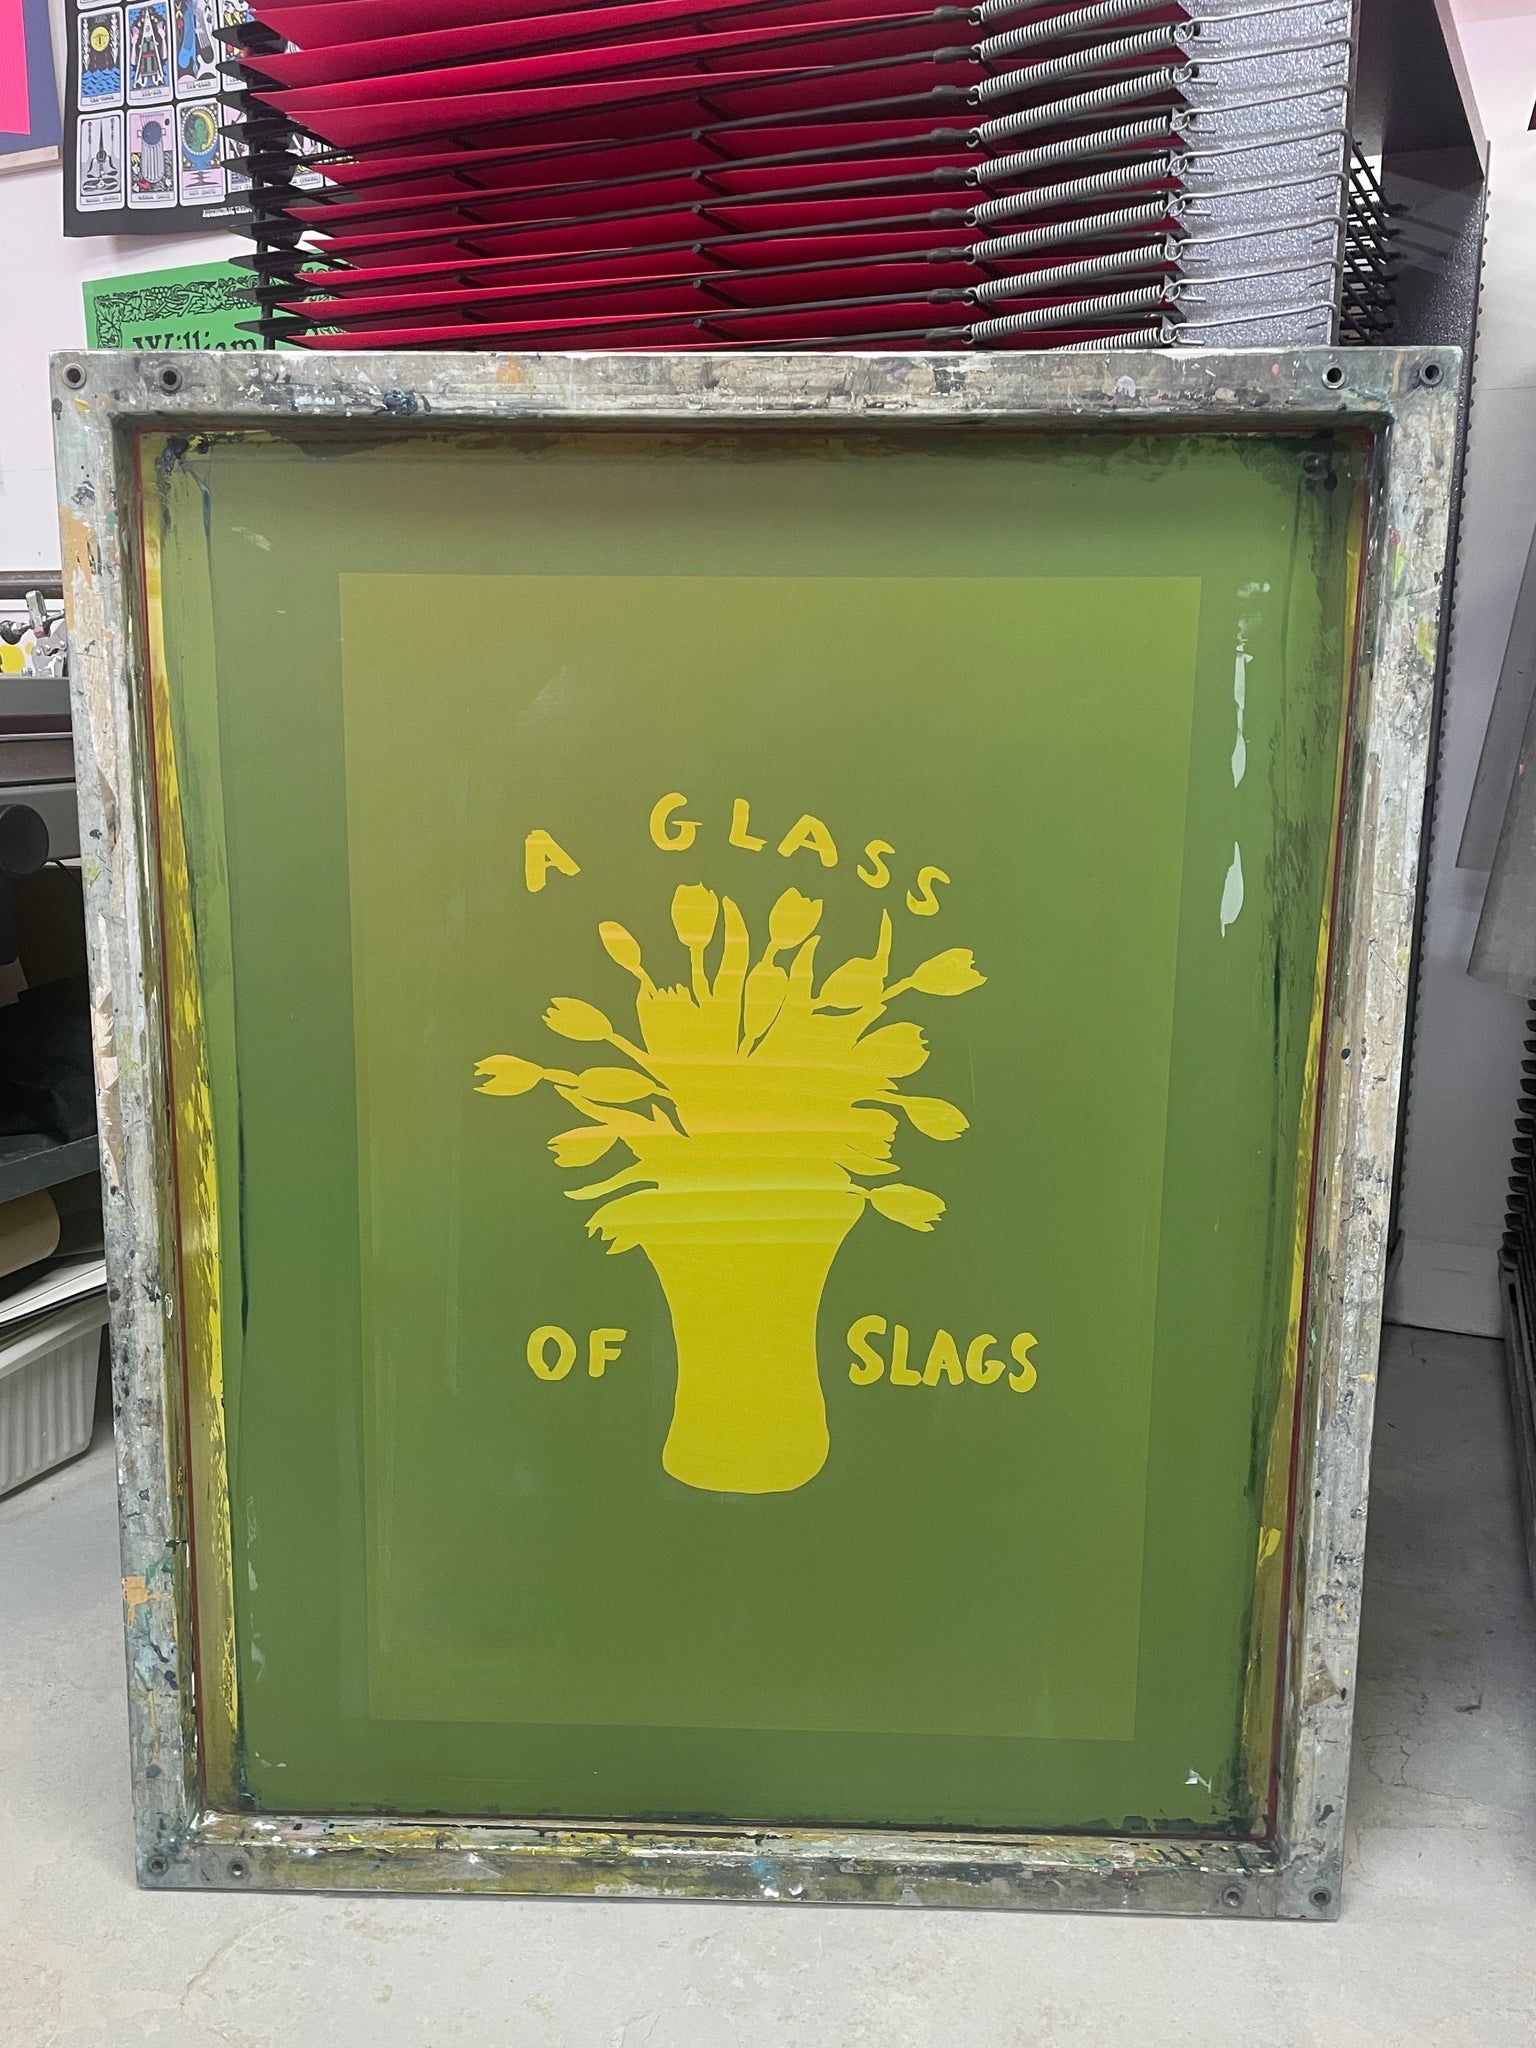 A glass of slags